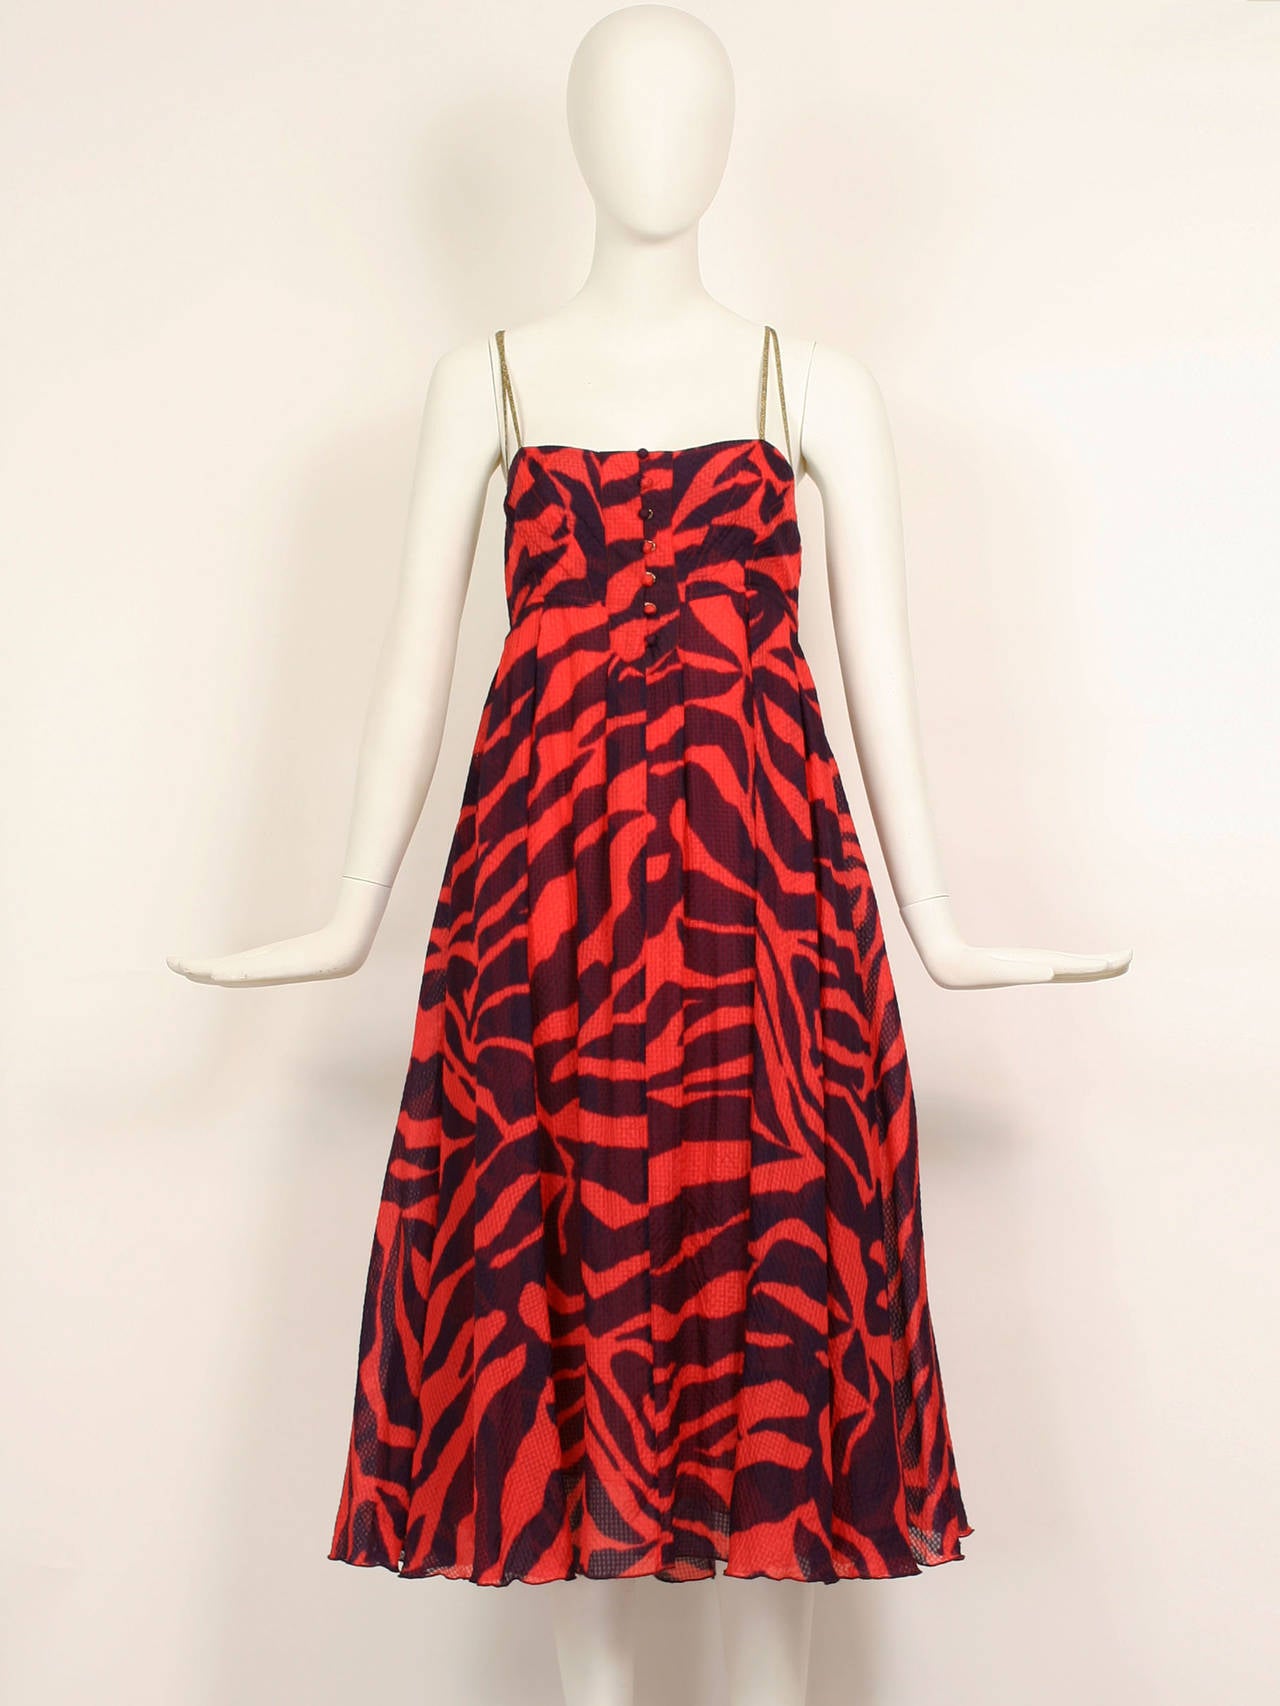 Borbonese Silk Abstract Print Sun Dress. 
Beautiful print. Double layer silk chiffon.
Excellent condition.
Size 44

Bust 34